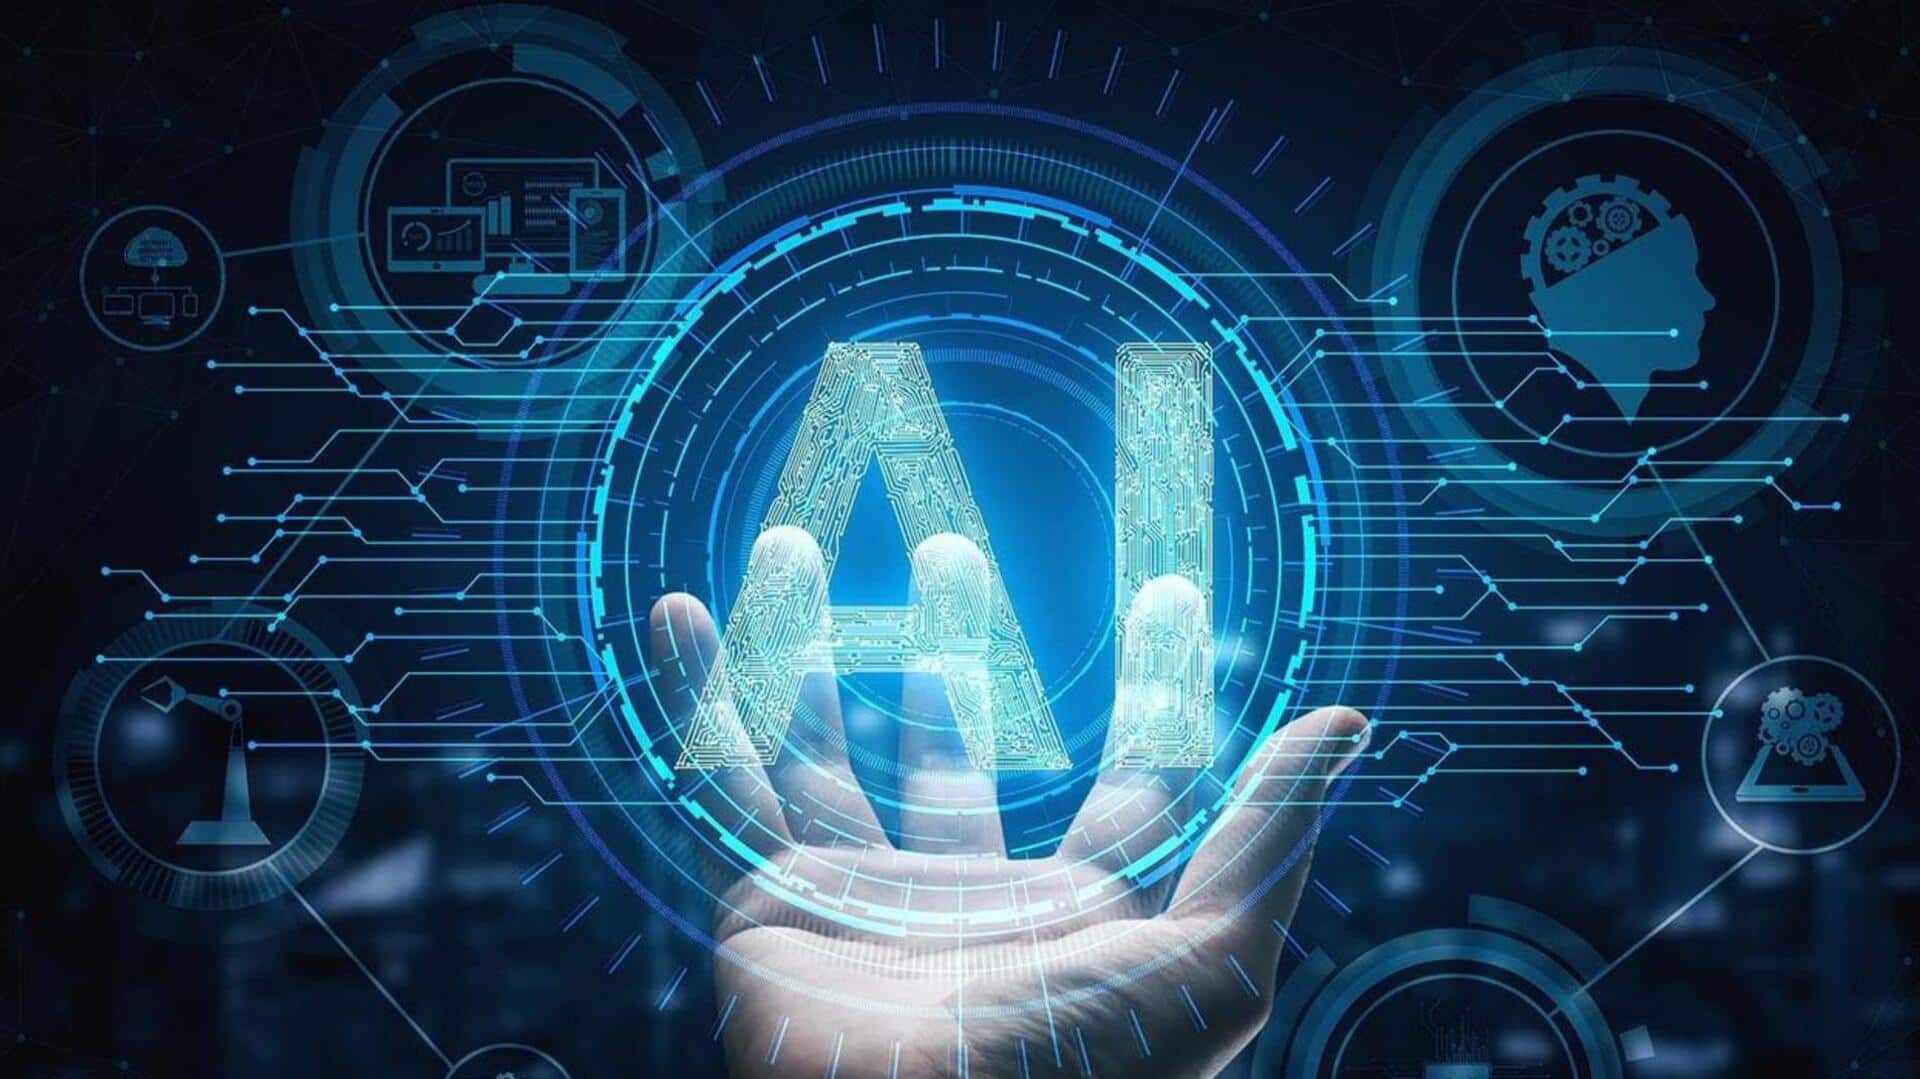 India is among the world's top 5 in AI talent